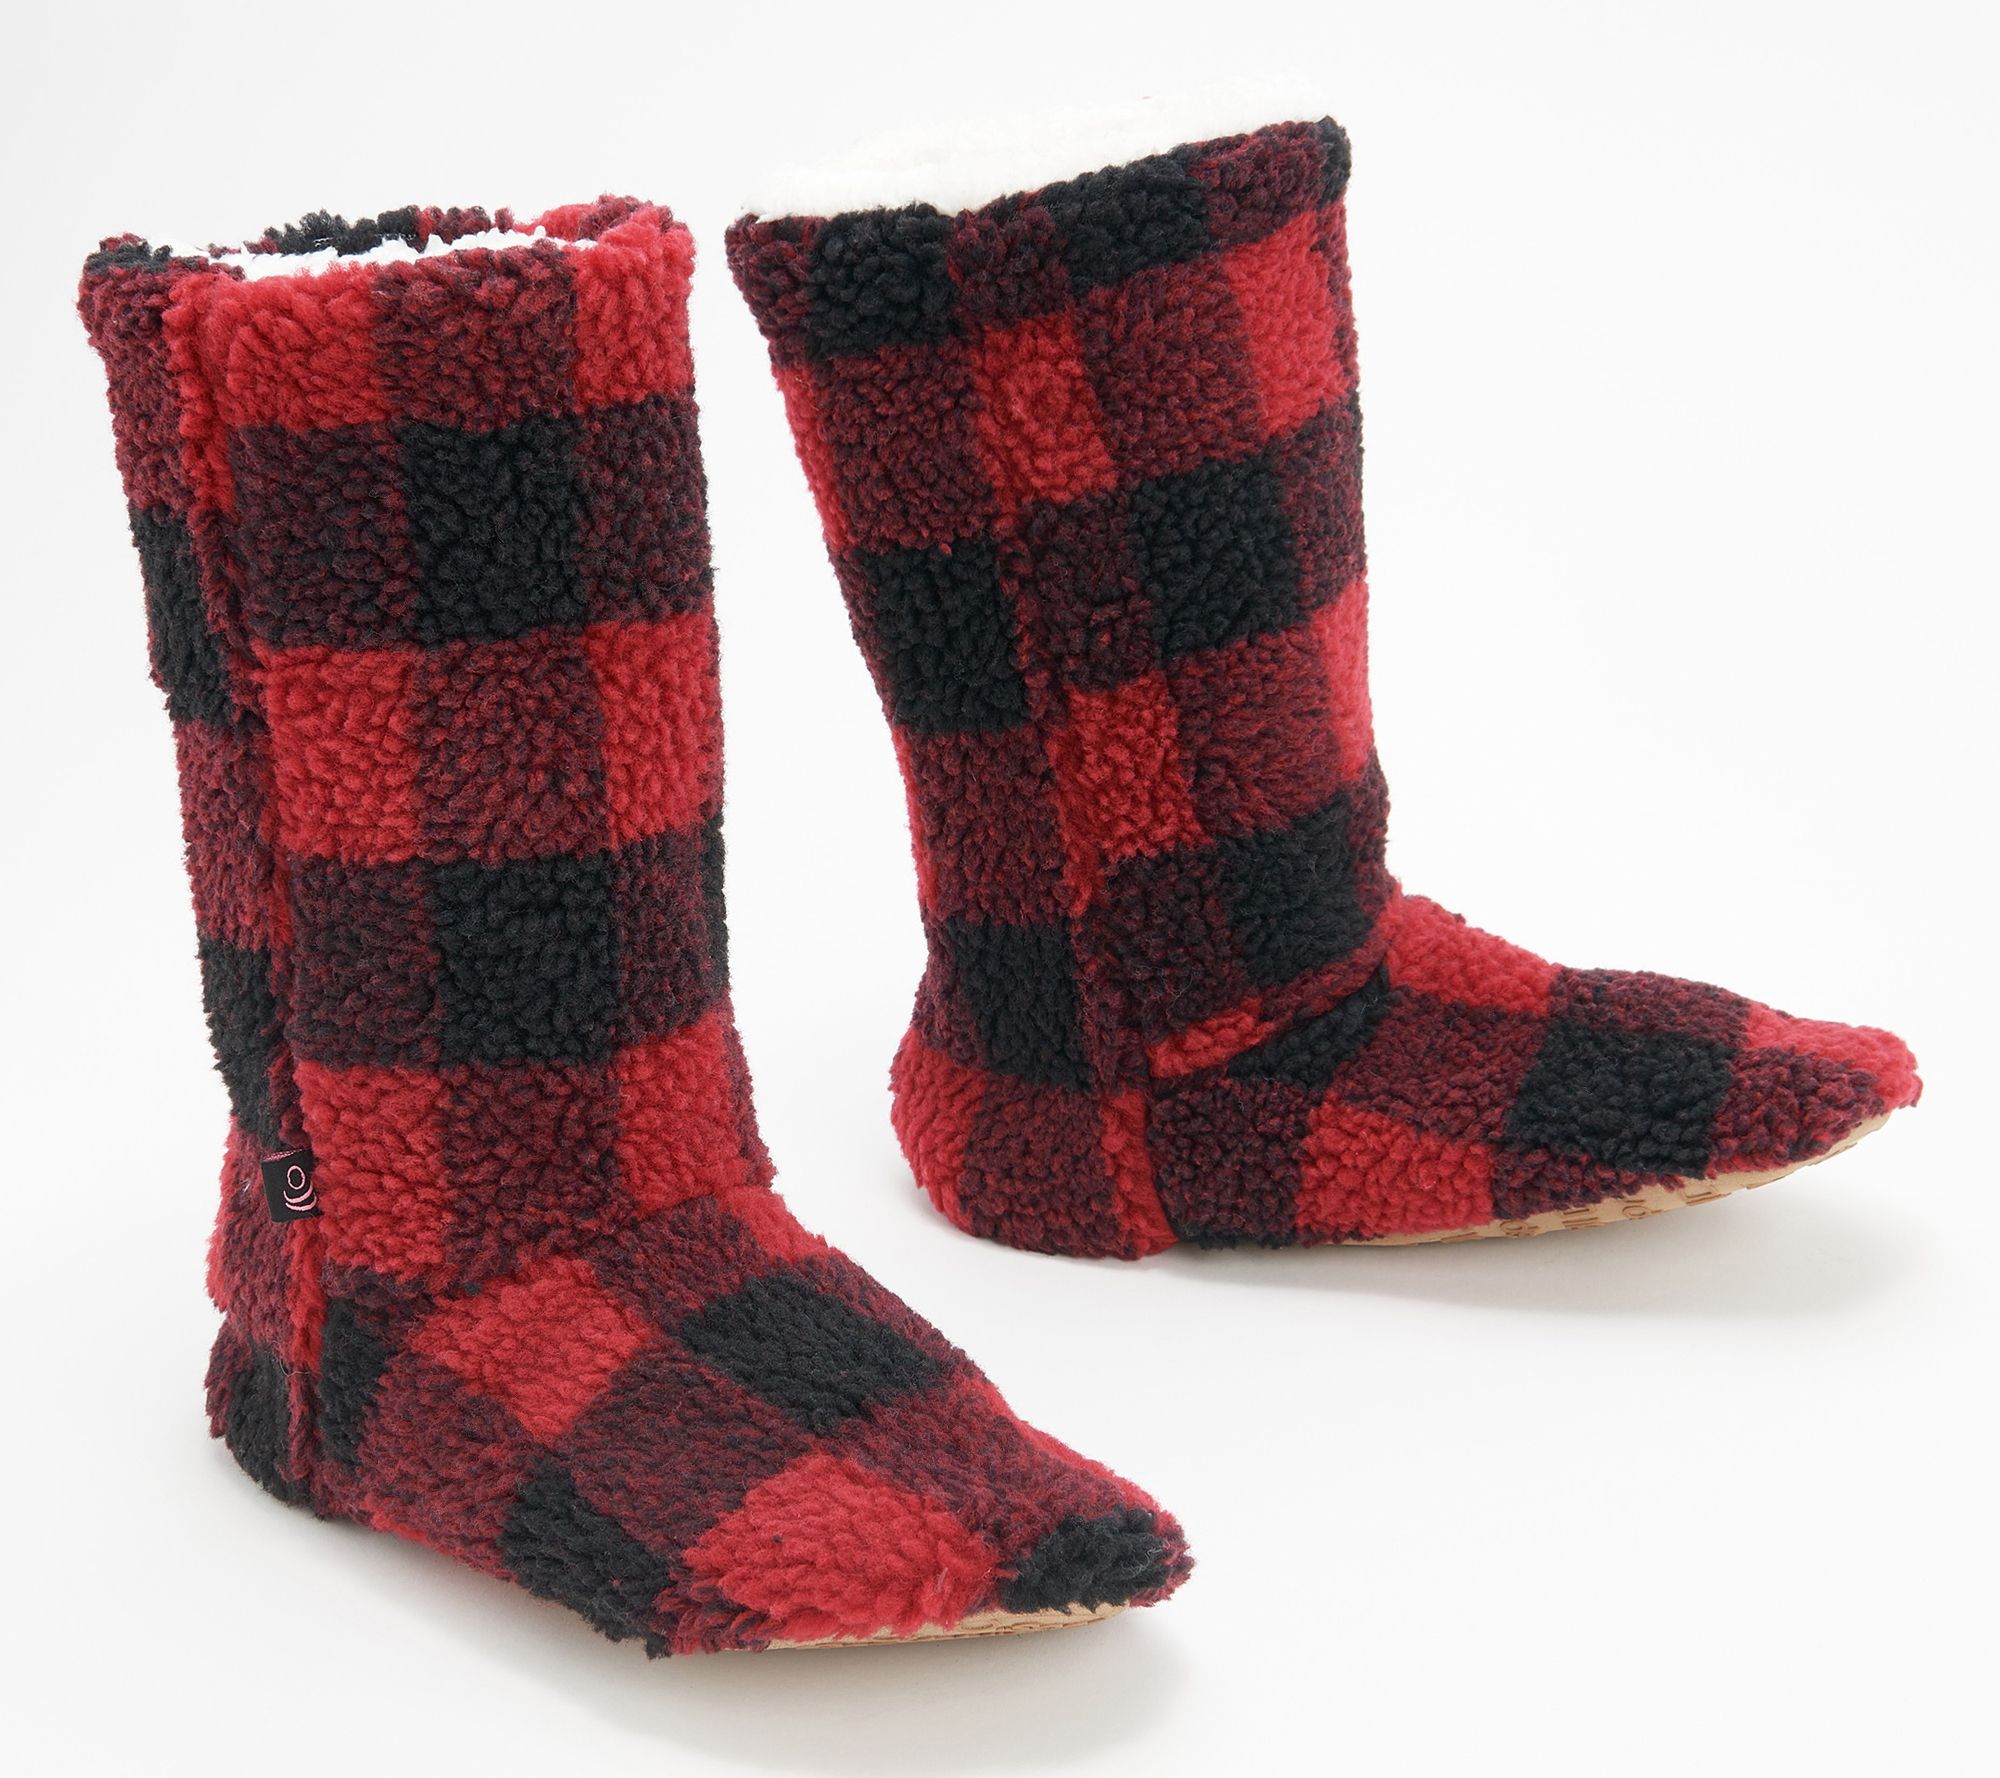 Cuddl Duds Buffalo Check Bootie Slipper with Faux Sherpa Lining - QVC.com